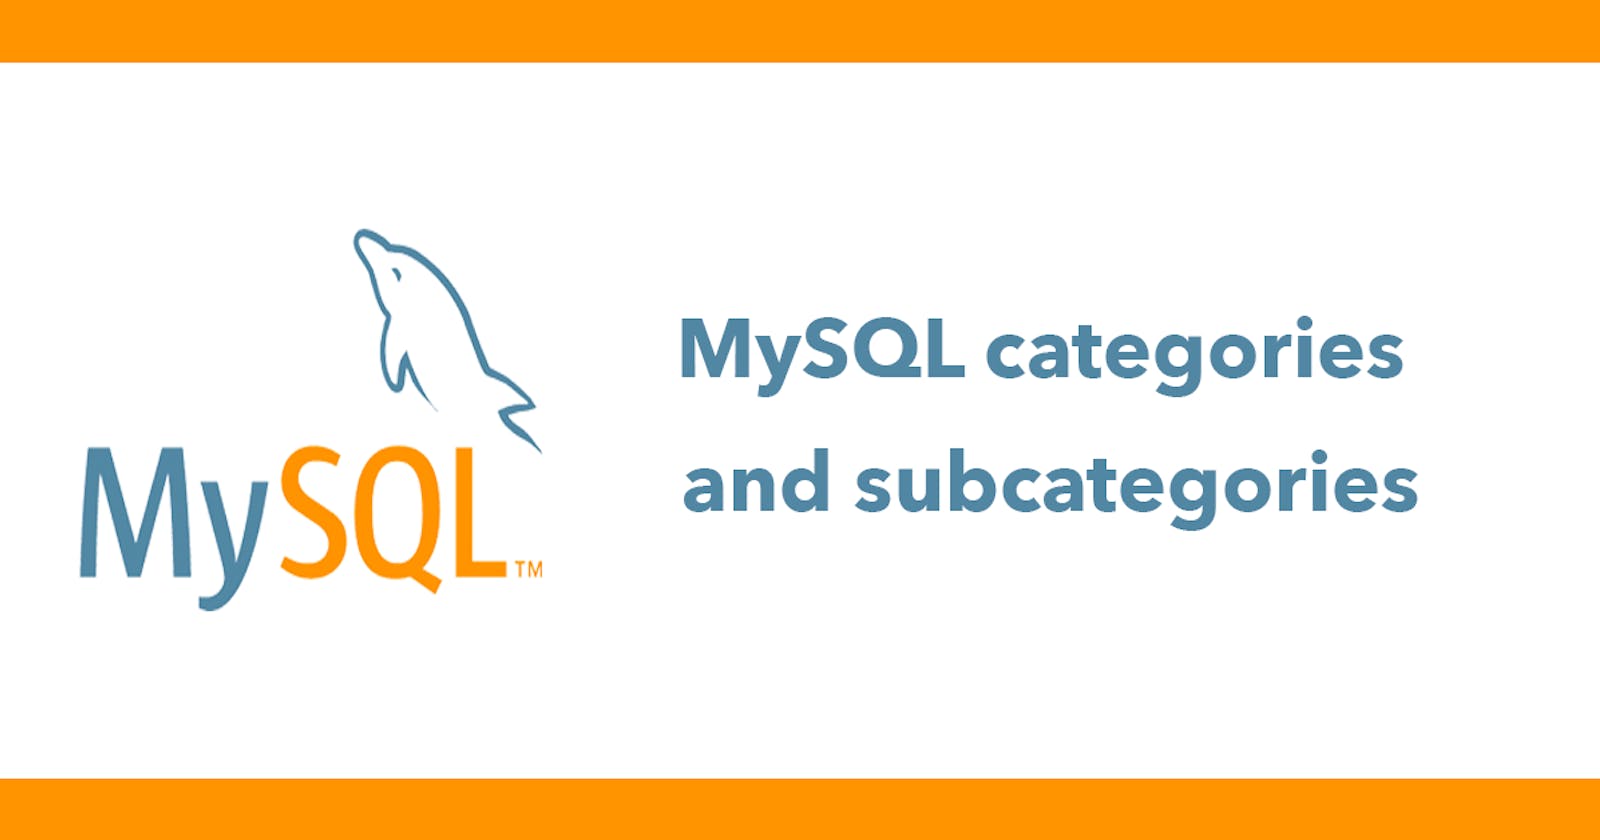 MySQL categories and subcategories